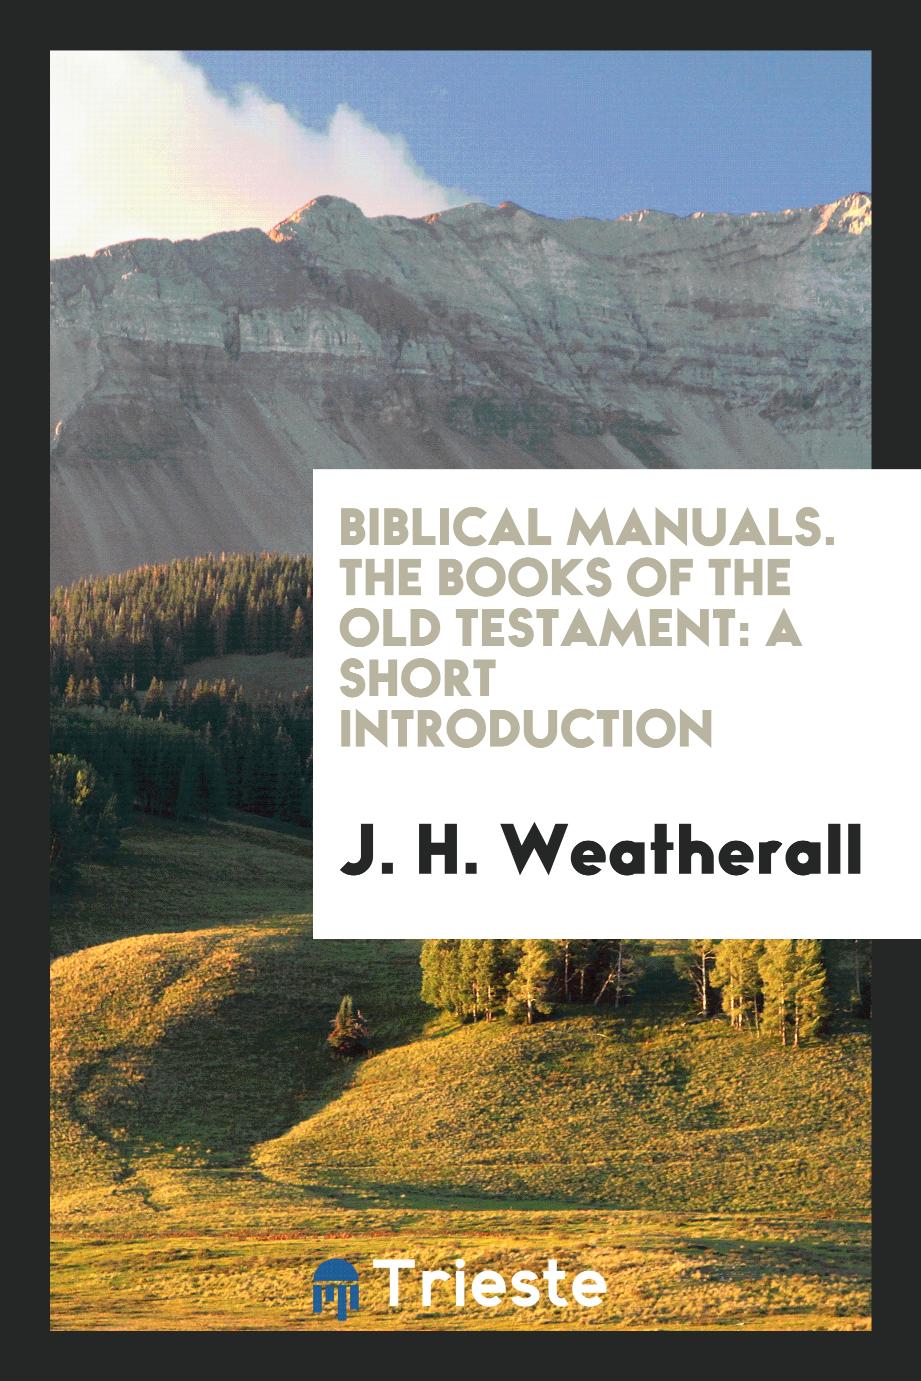 Biblical Manuals. The Books of the Old Testament: A Short Introduction